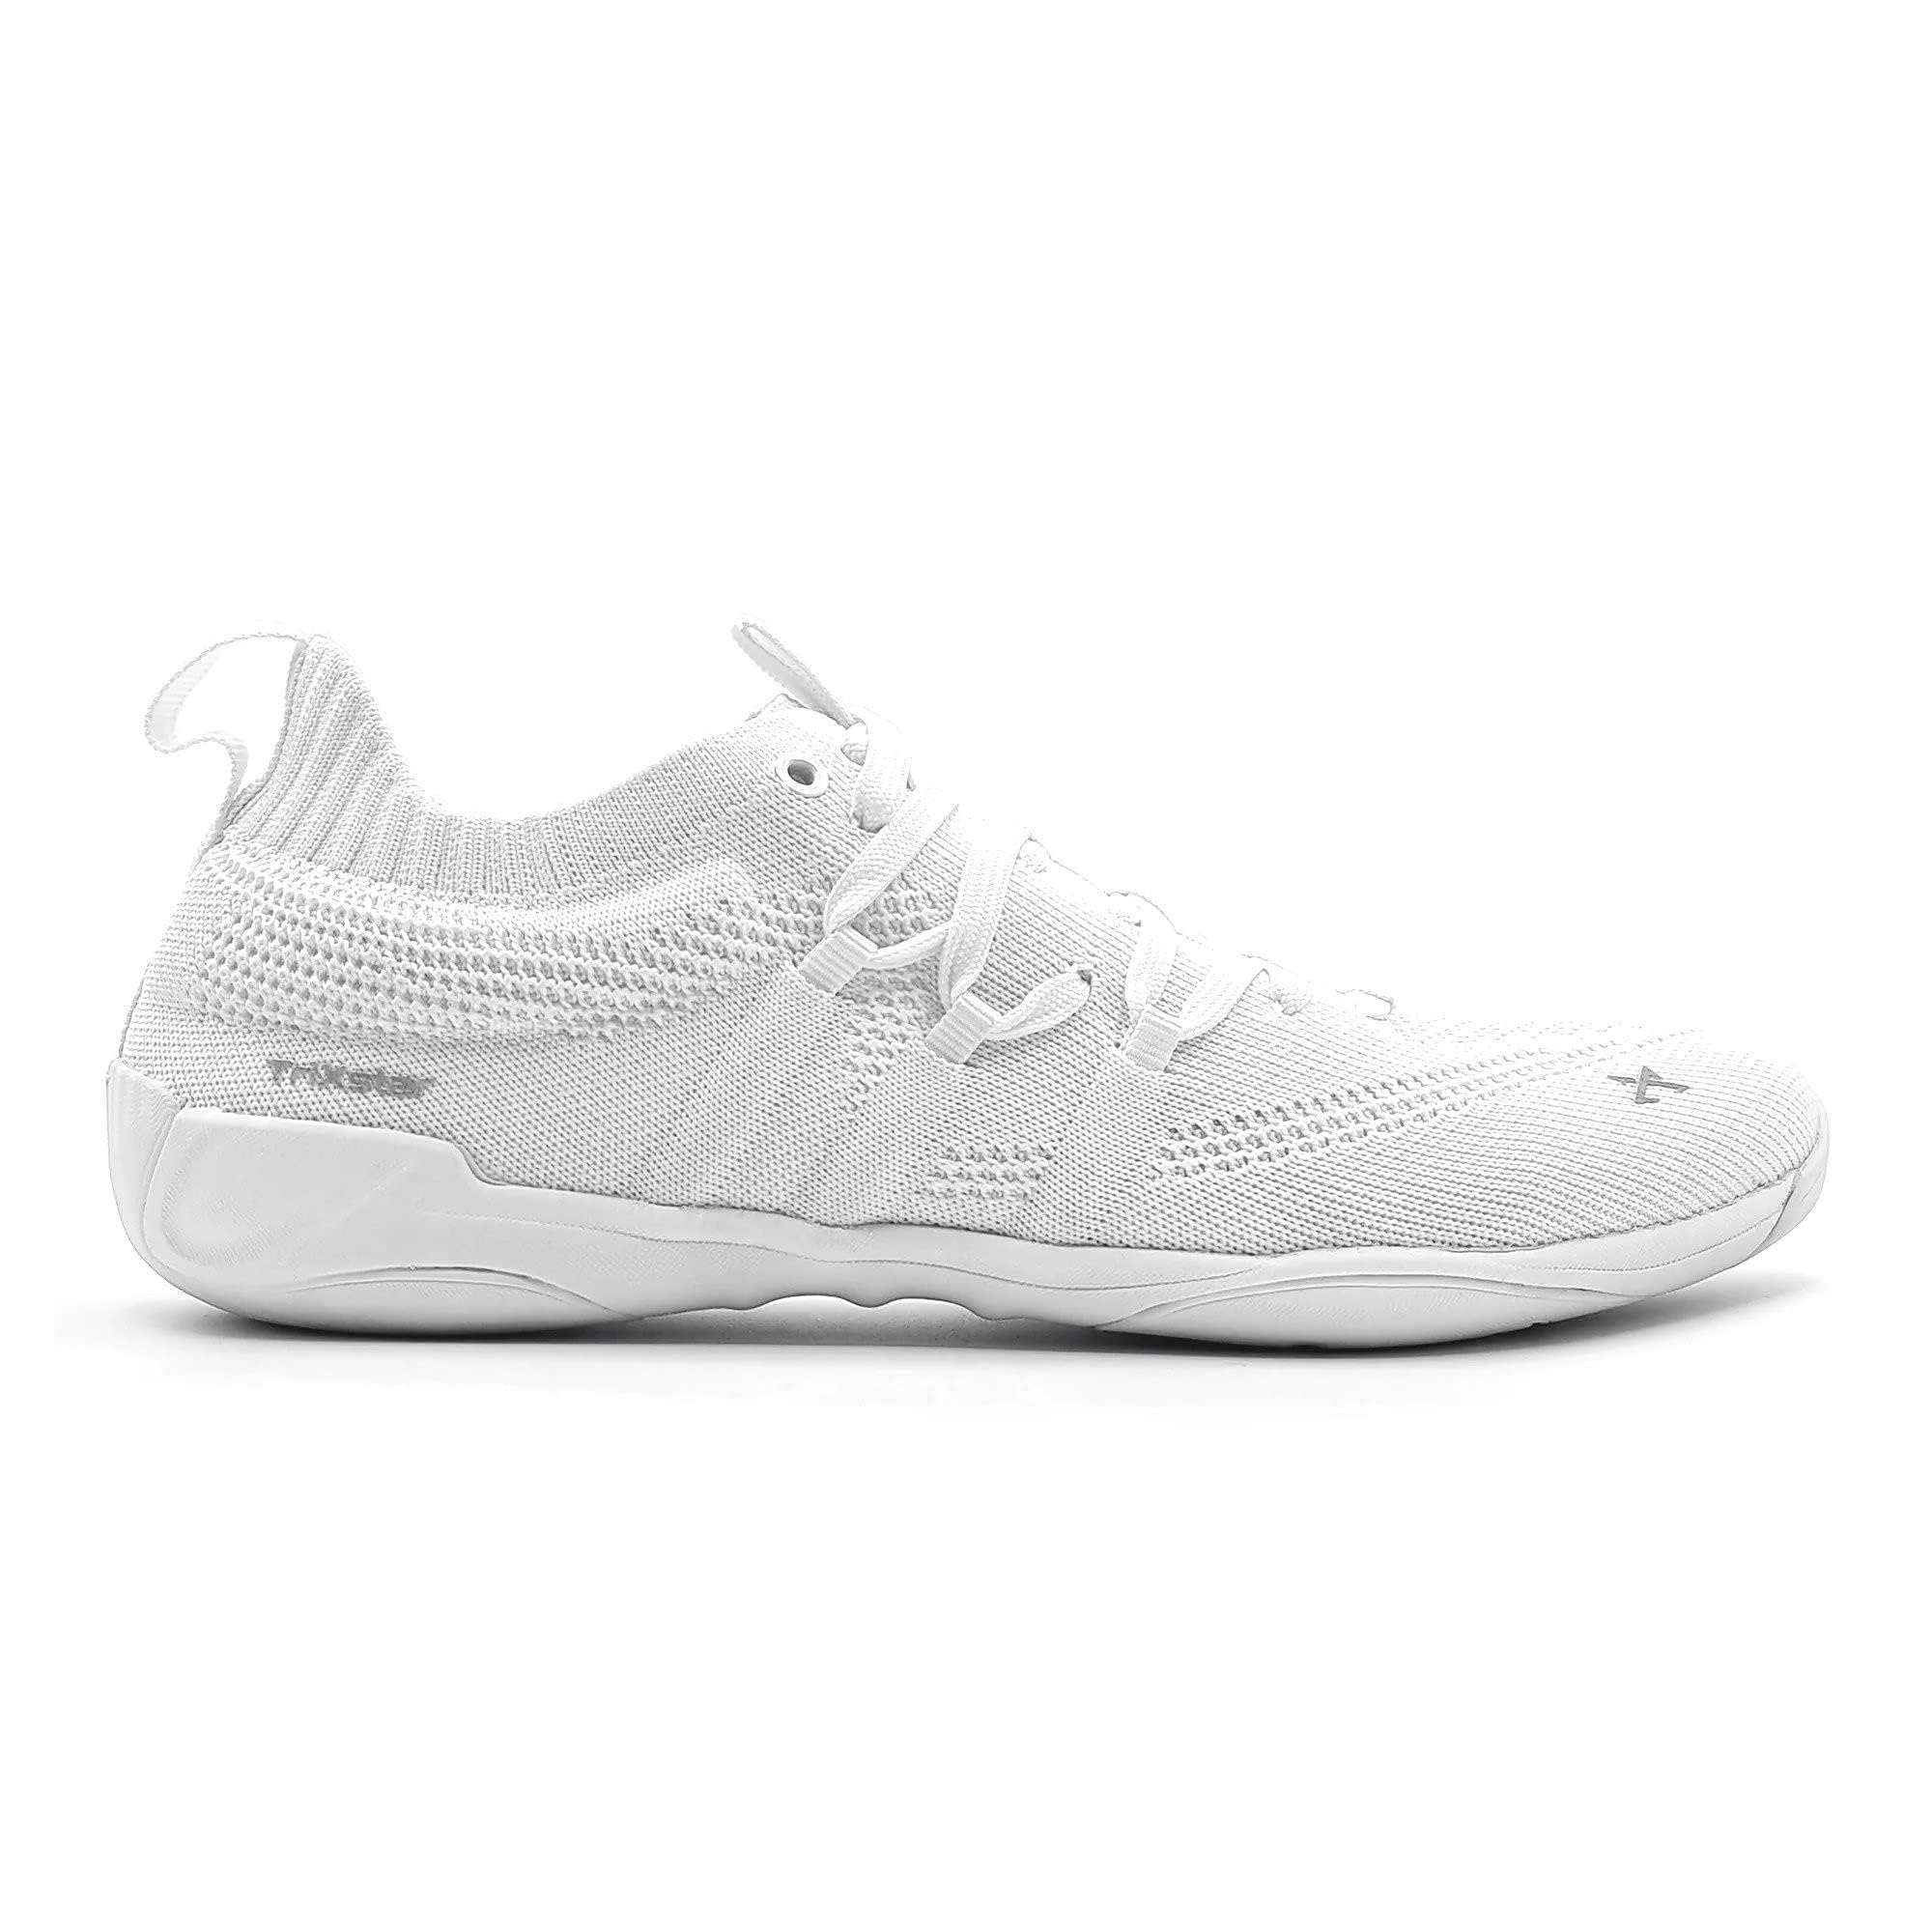 TriXstar Altair Unisex Premium Cheer Shoes, Cheerleading Sneakers Lightweight Lace Up Shoe for Men and Women, Superior Functional Design, White